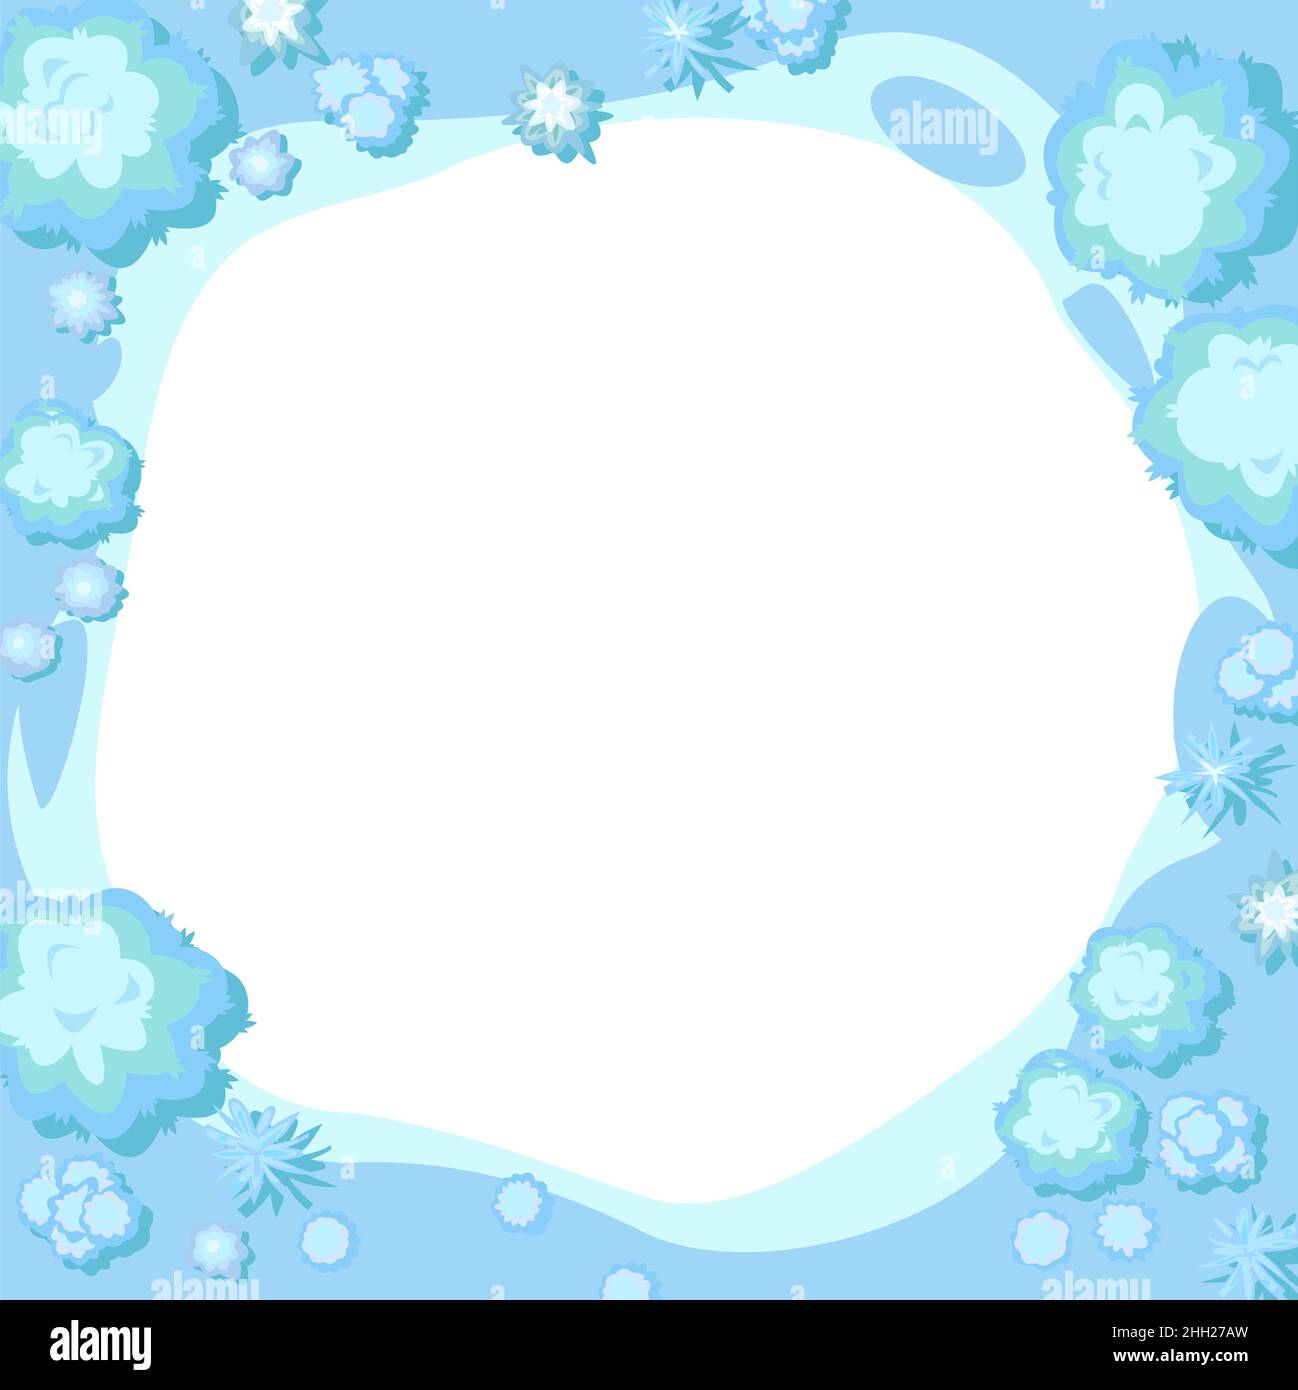 Winter landscape top view. Frame around edge of round image. Snowy frosty nature in cold season. From high. Drifts of snow. Illustration in cartoon st Stock Vector